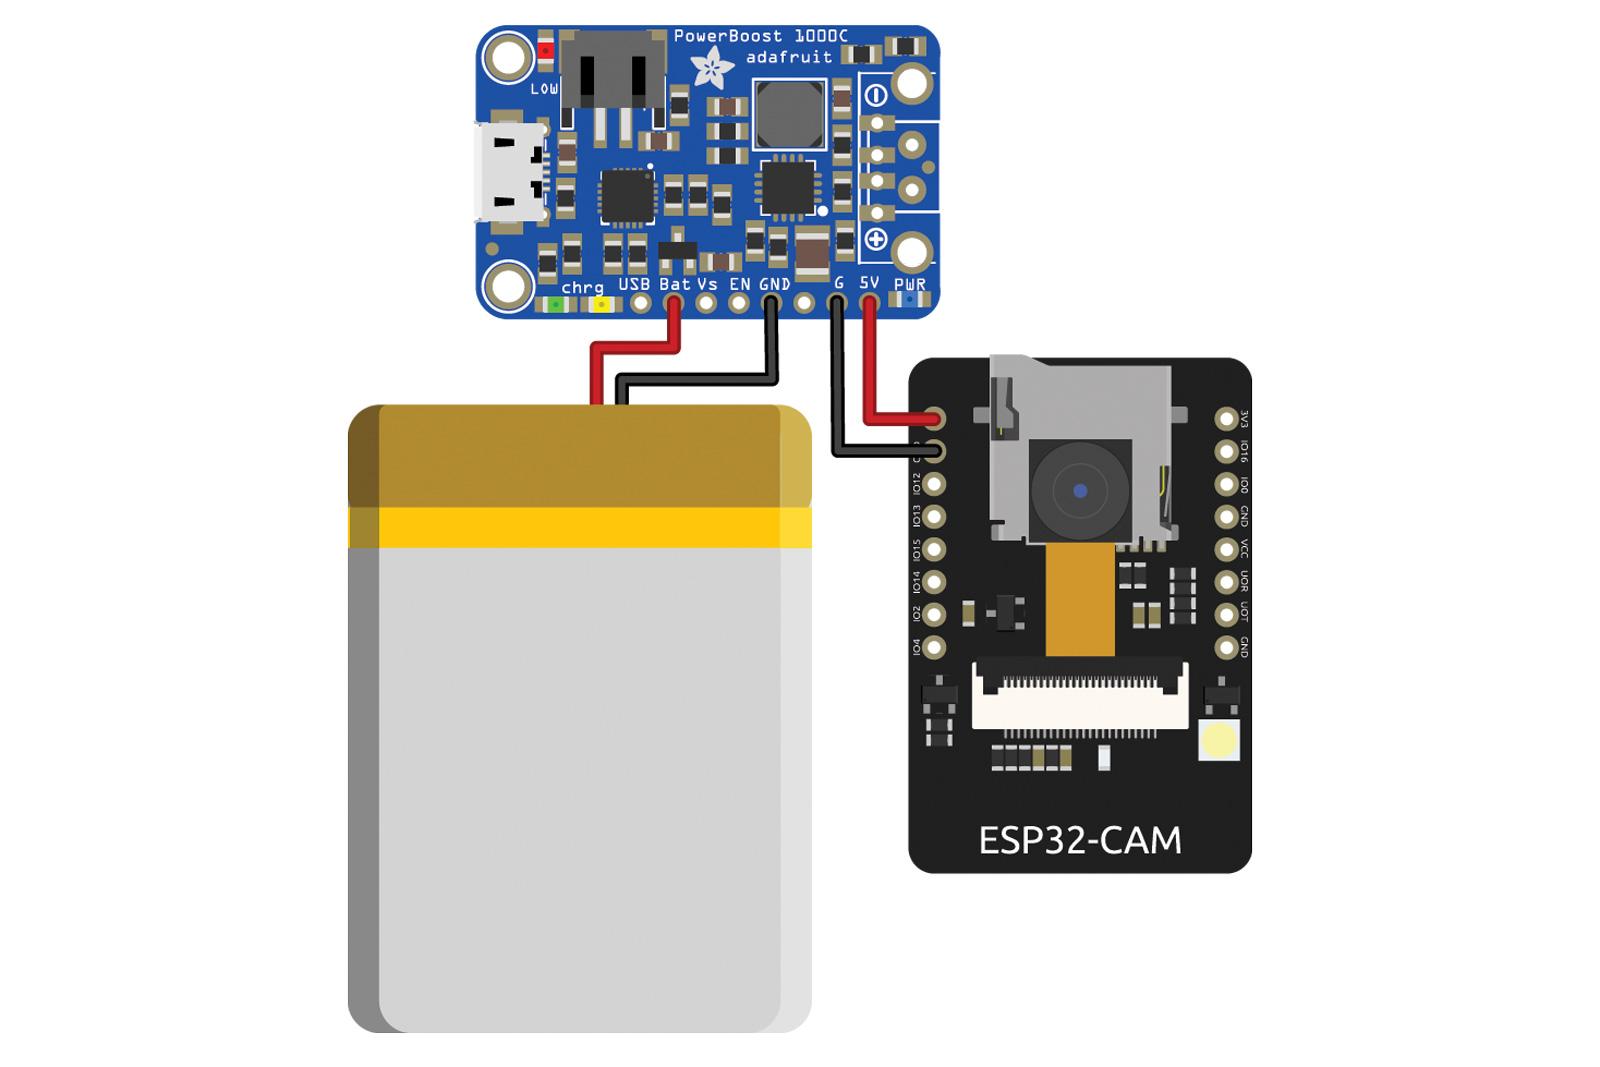 How to configure and use ESP32-CAM with Arduino IDE and Linux